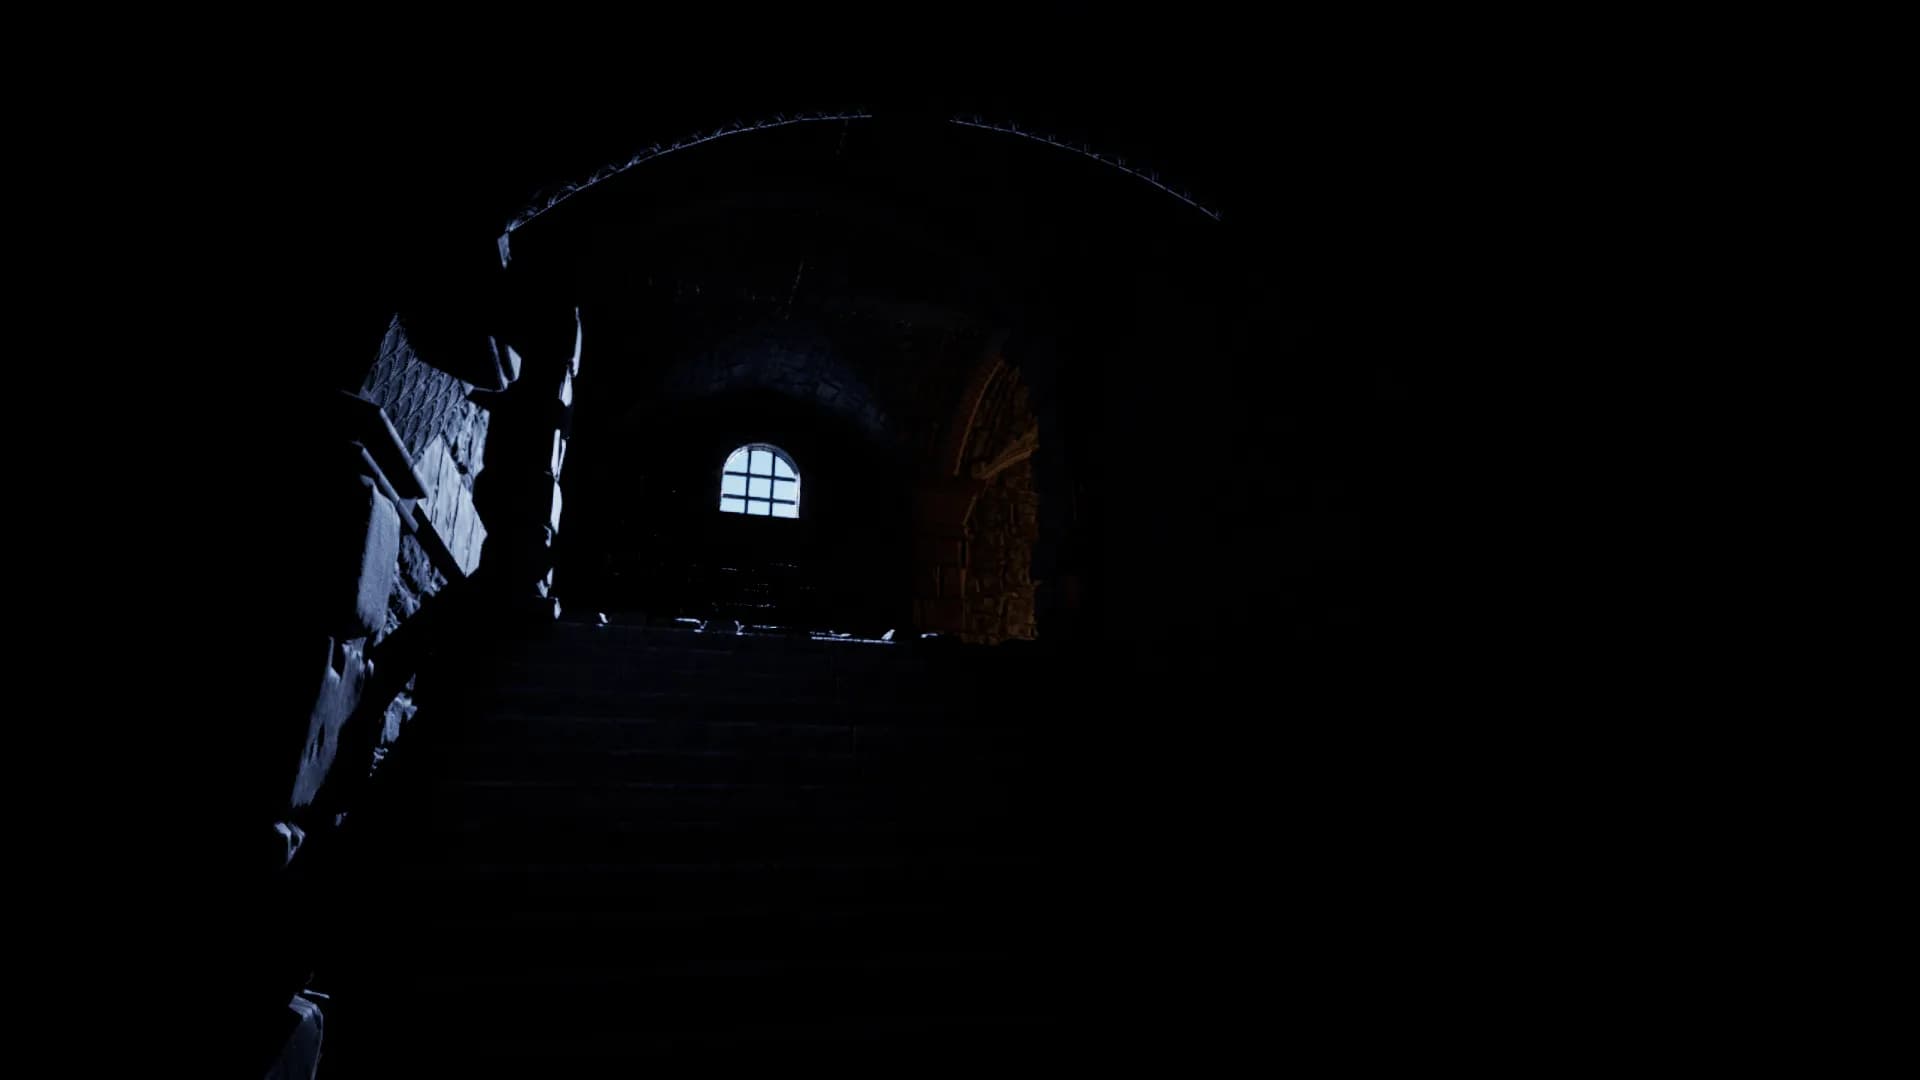 Screenshot 3: Stairs to the crypt illuminated by light from the window